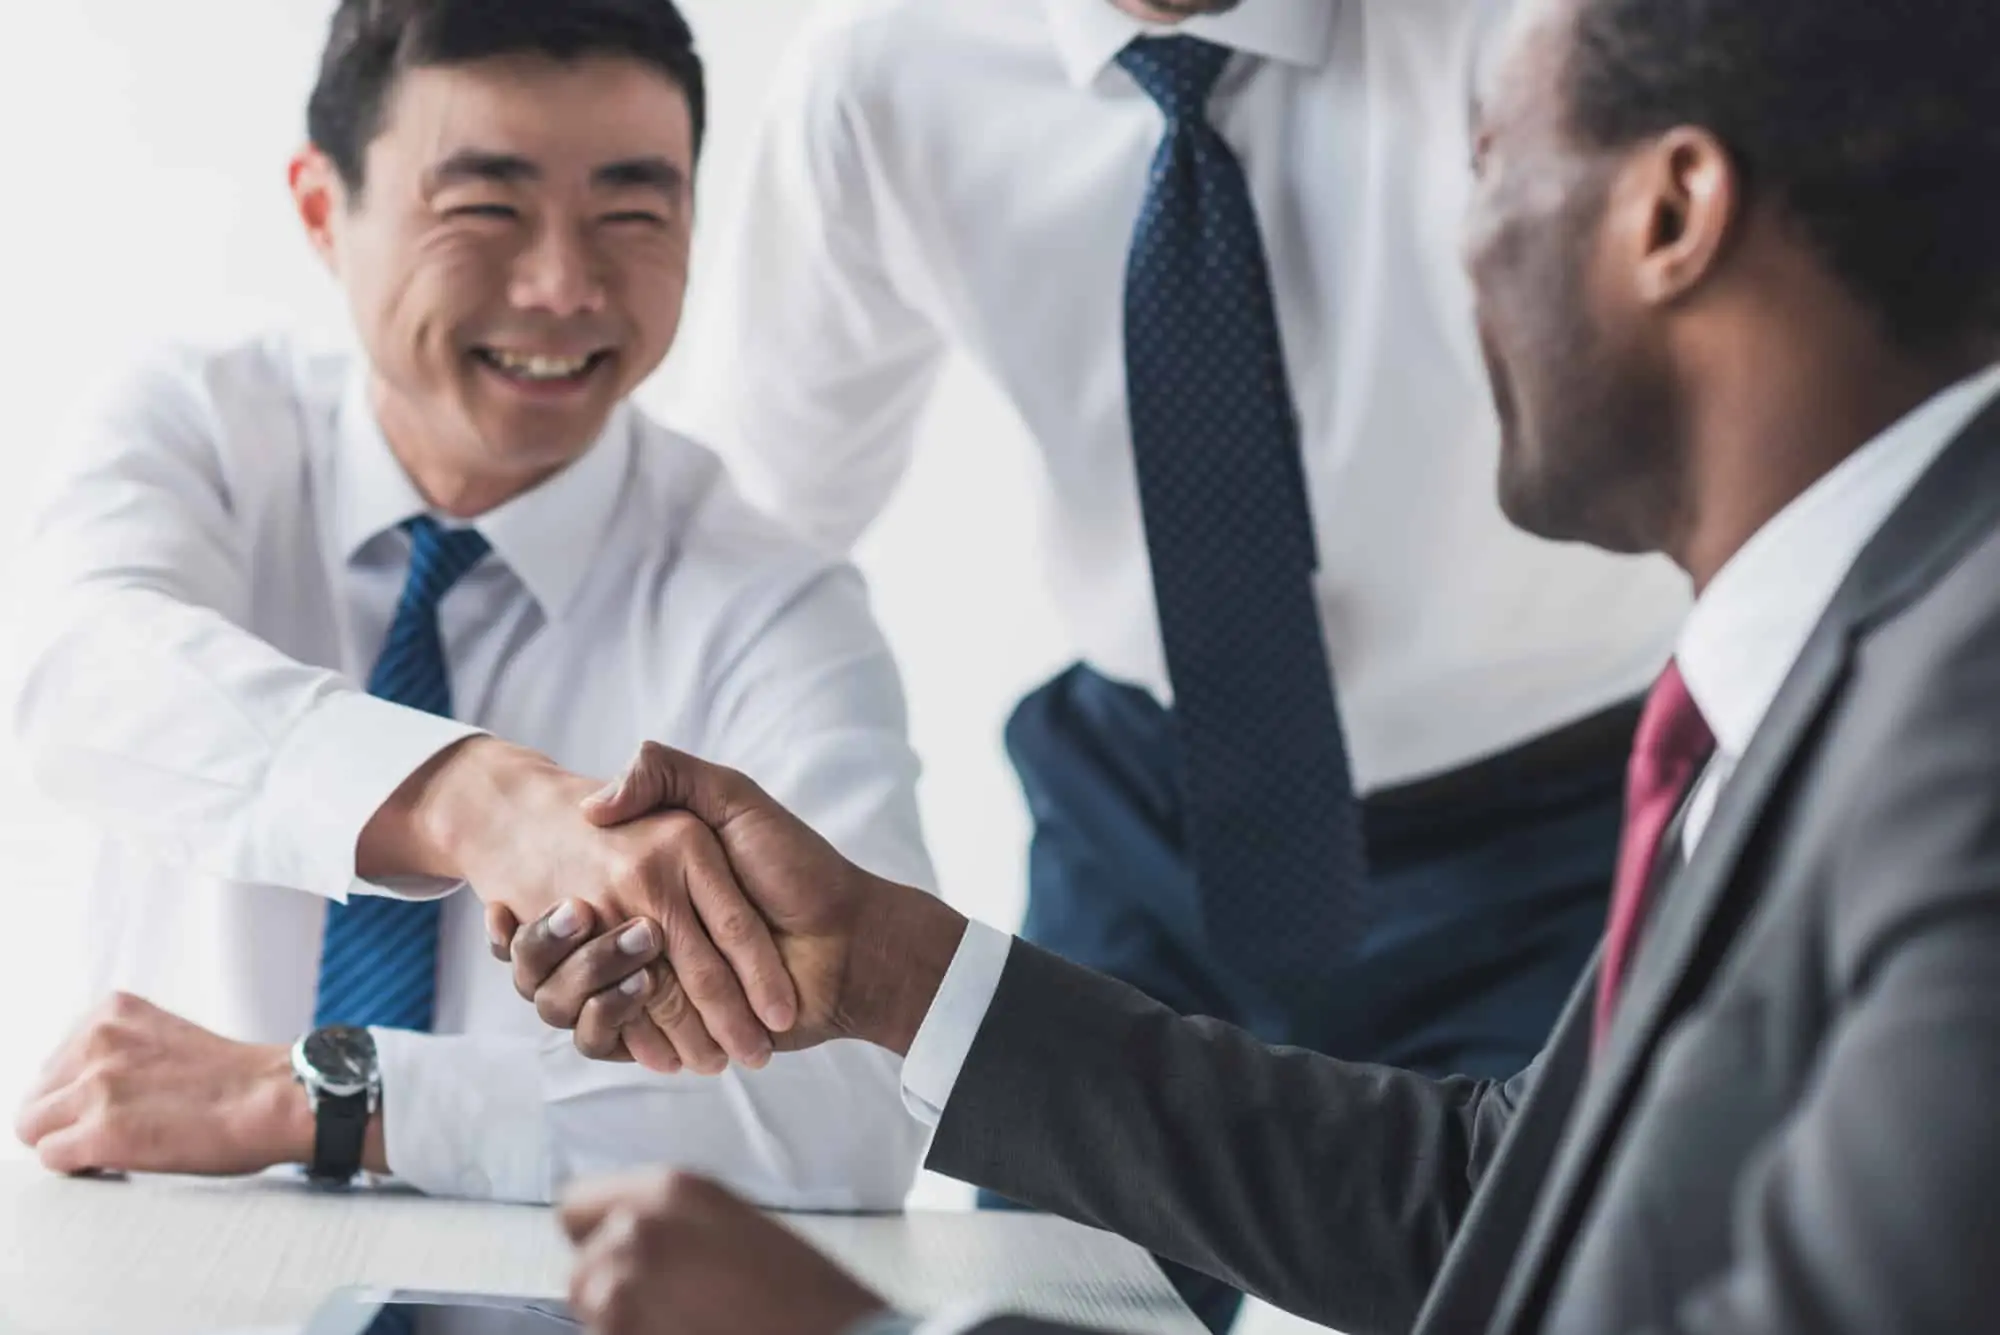 Black male tax accountant with a good personality laughing and shaking hands with East Asian male client